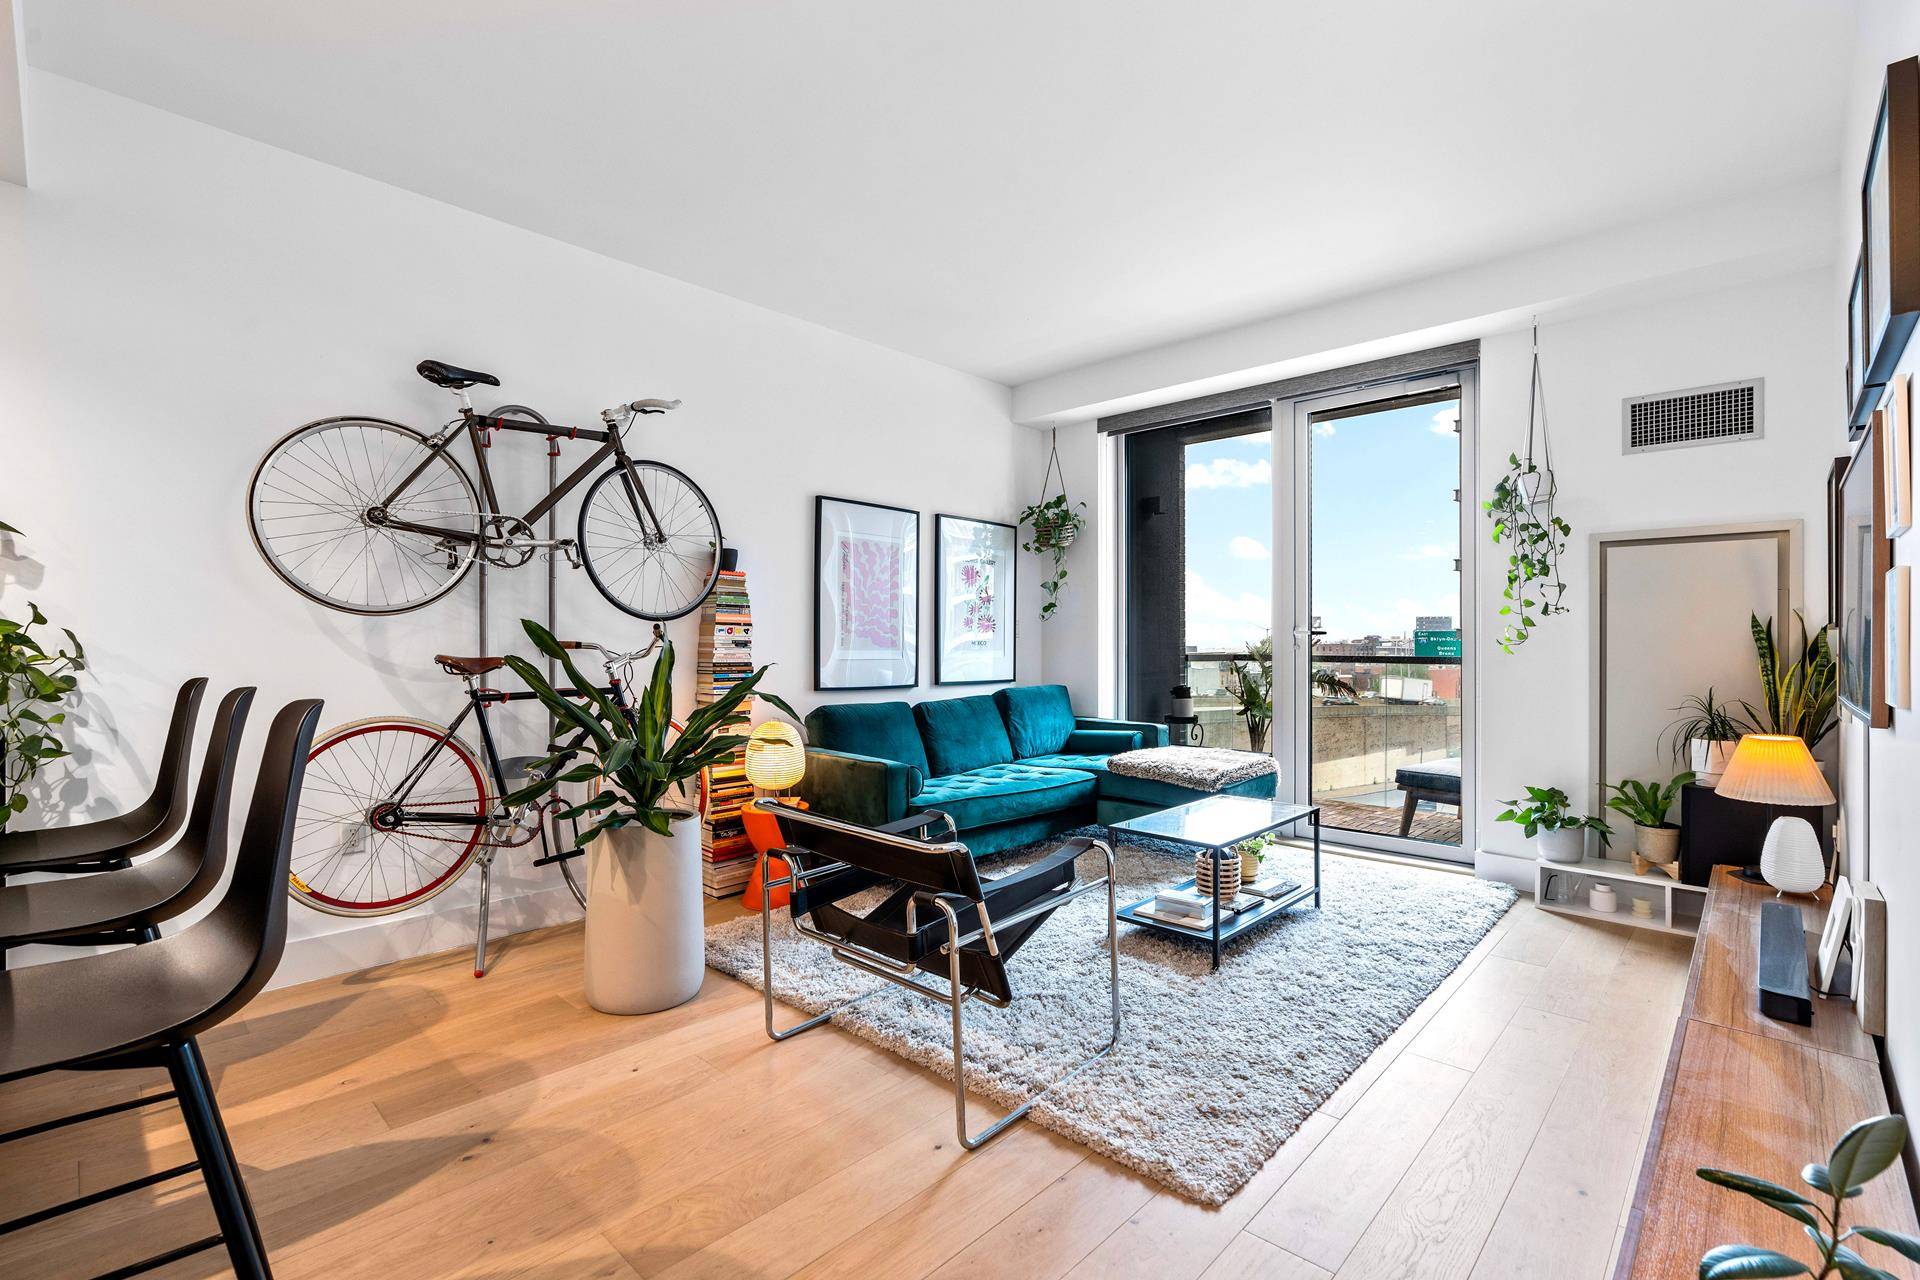 Welcome to Residence 4B at 575 Fourth Avenue, a modern one bedroom home in a brand new amenity rich condo building nestled in a convenient area of Park Slope.